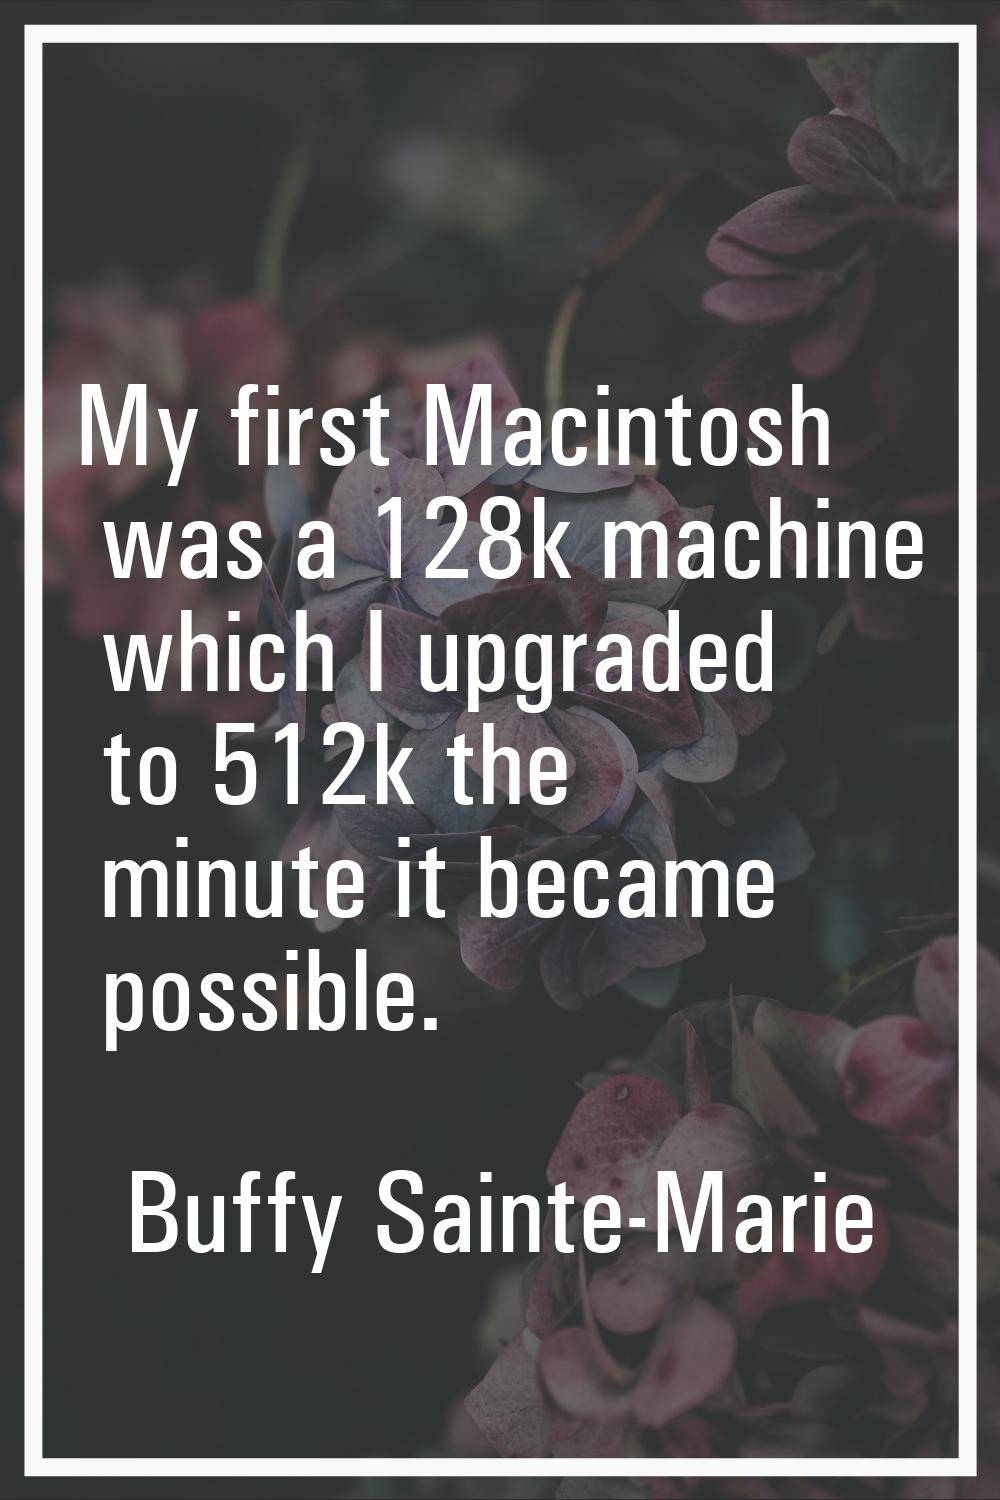 My first Macintosh was a 128k machine which I upgraded to 512k the minute it became possible.